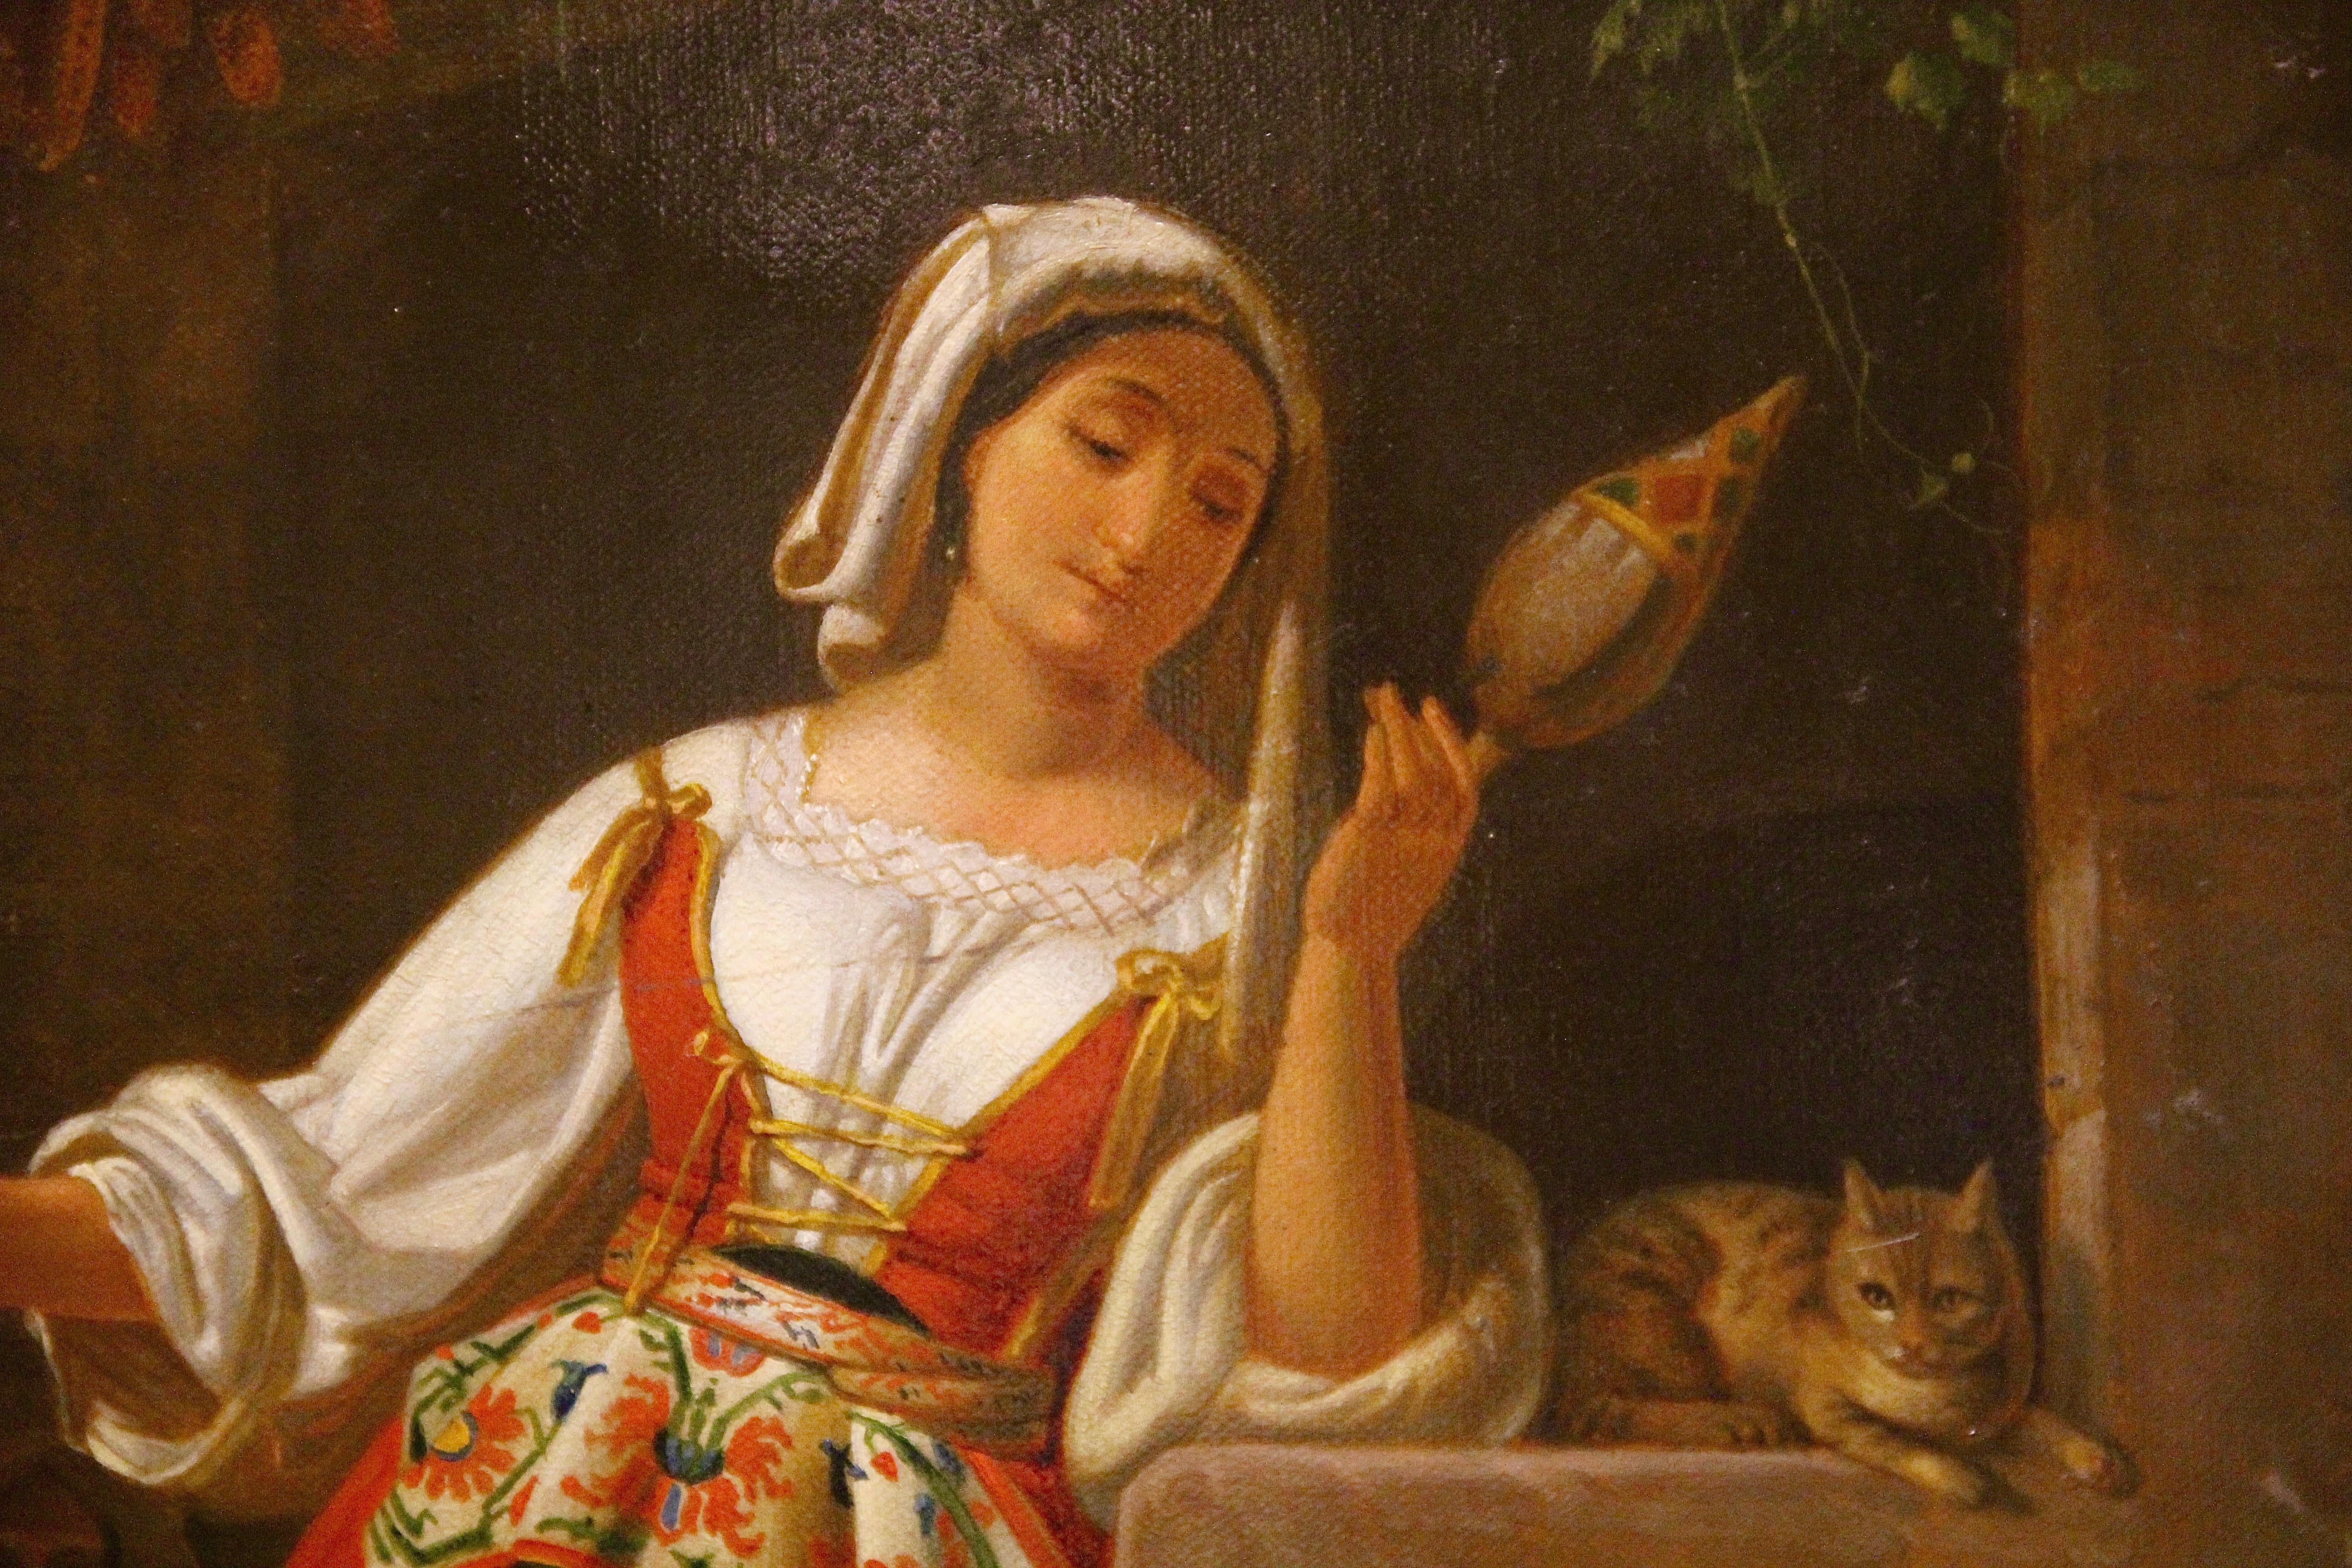 Antique oil painting. Oil on canvas. 19th century. 